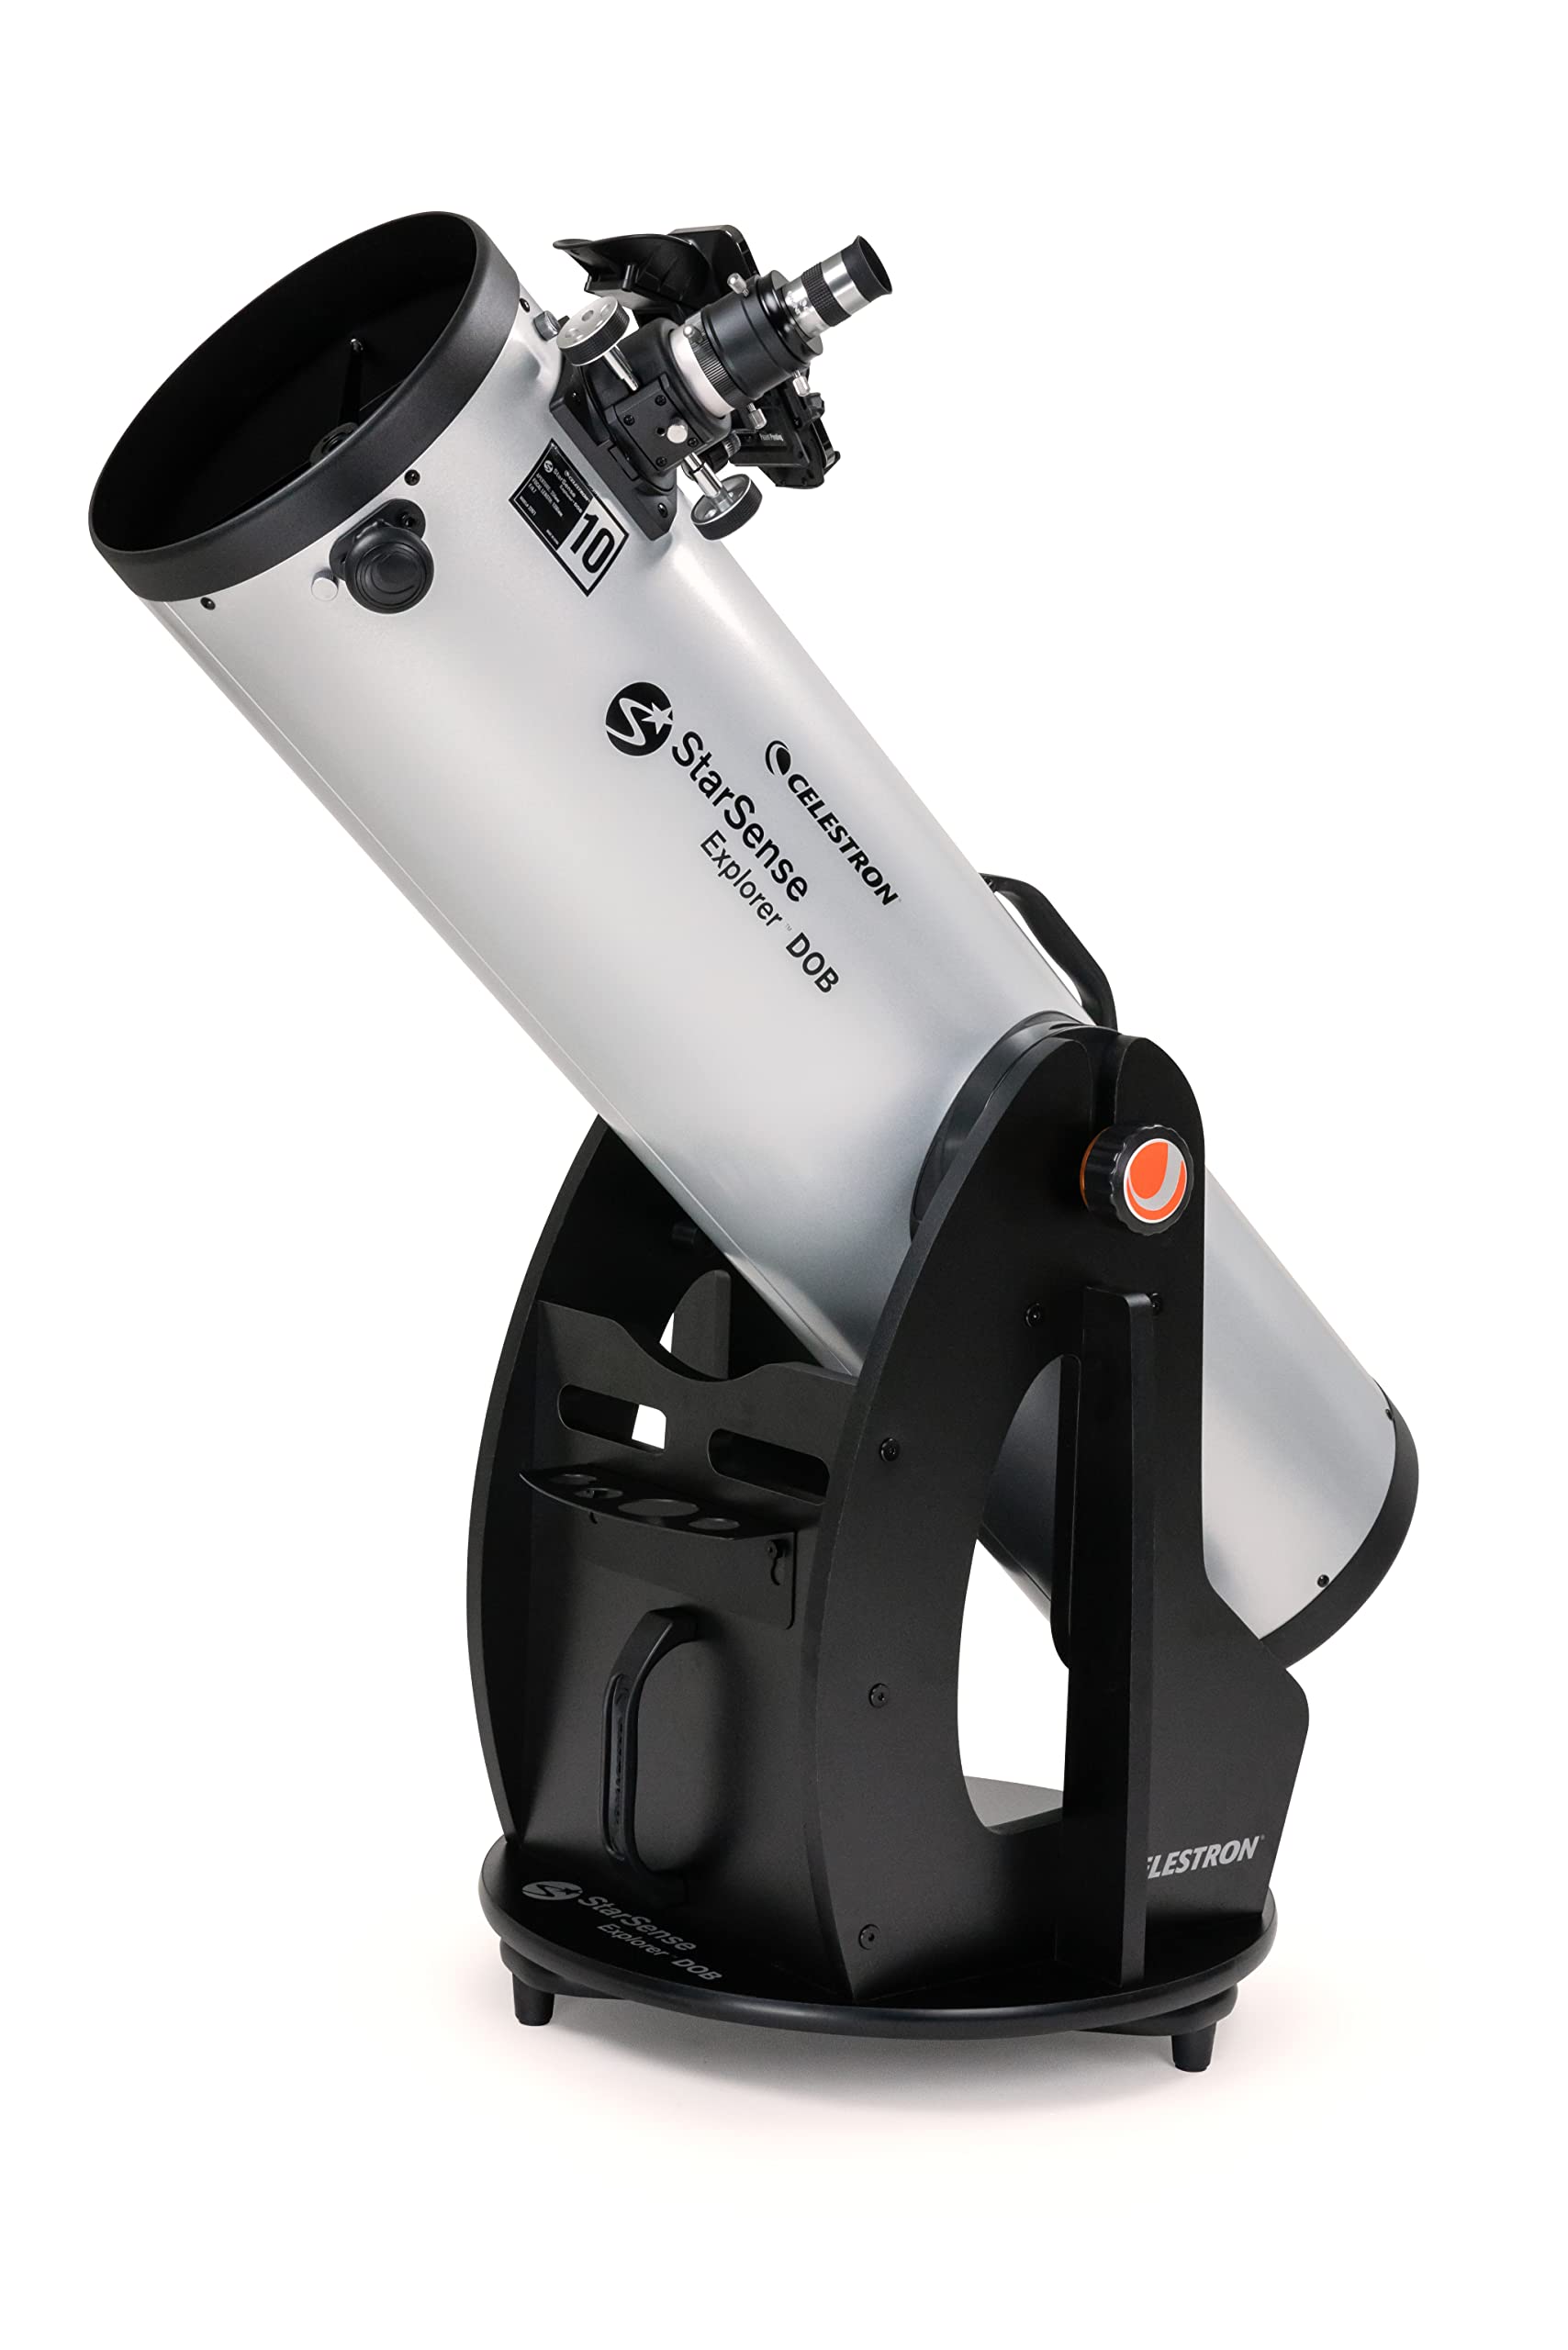  Celestron –StarSense Explorer 10-inch Dobsonian Smartphone App-Enabled Telescope – Works with StarSense App to Help You Find Nebulae, Planets & More –10-inch DOB Telescope – iPhone/Android...